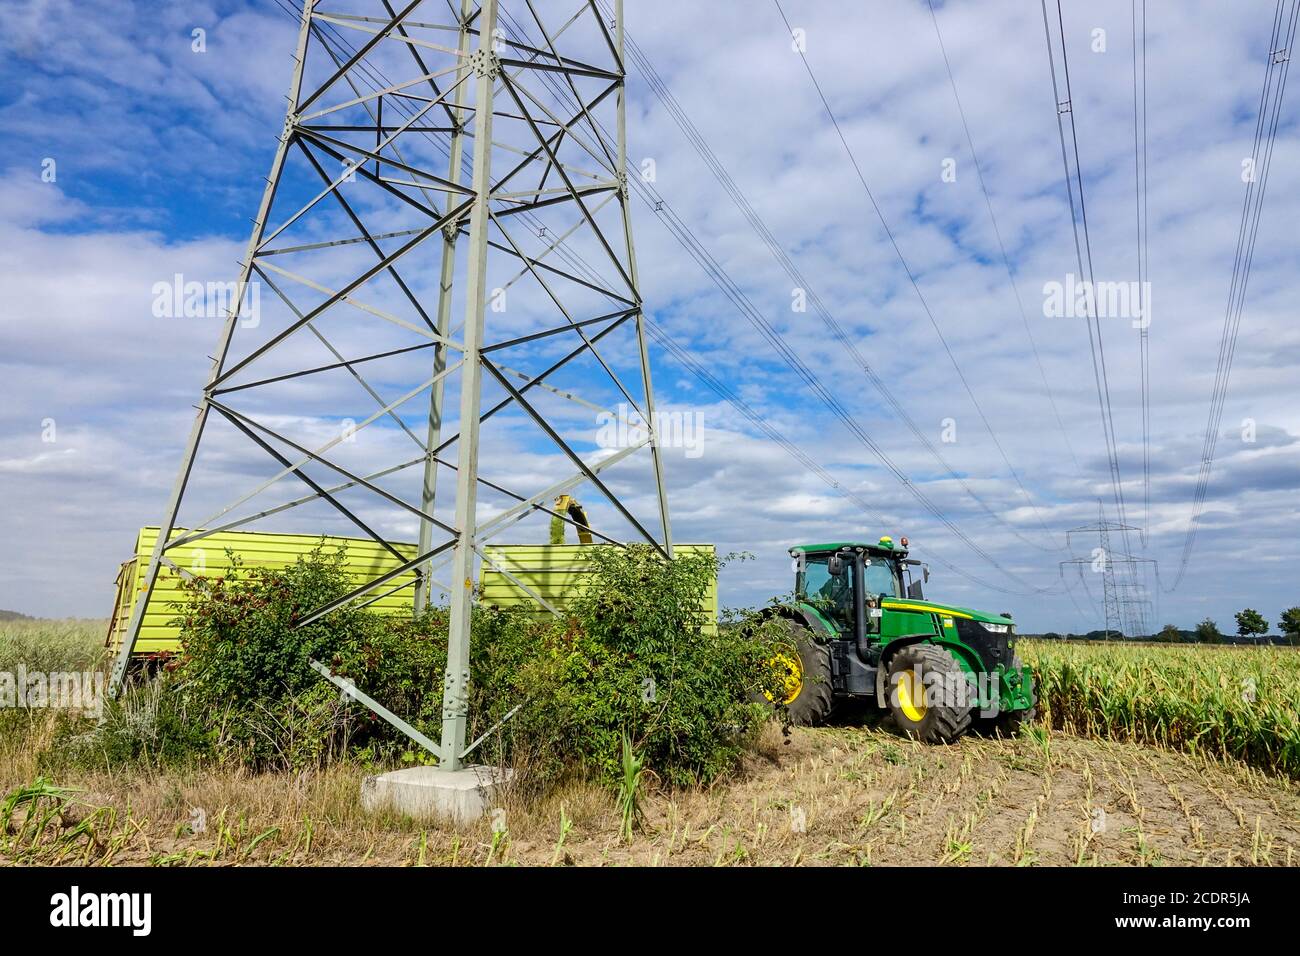 Agriculture farming harvesting corn under high-voltage lines and pylons John Deere tractor goes around a mast Stock Photo